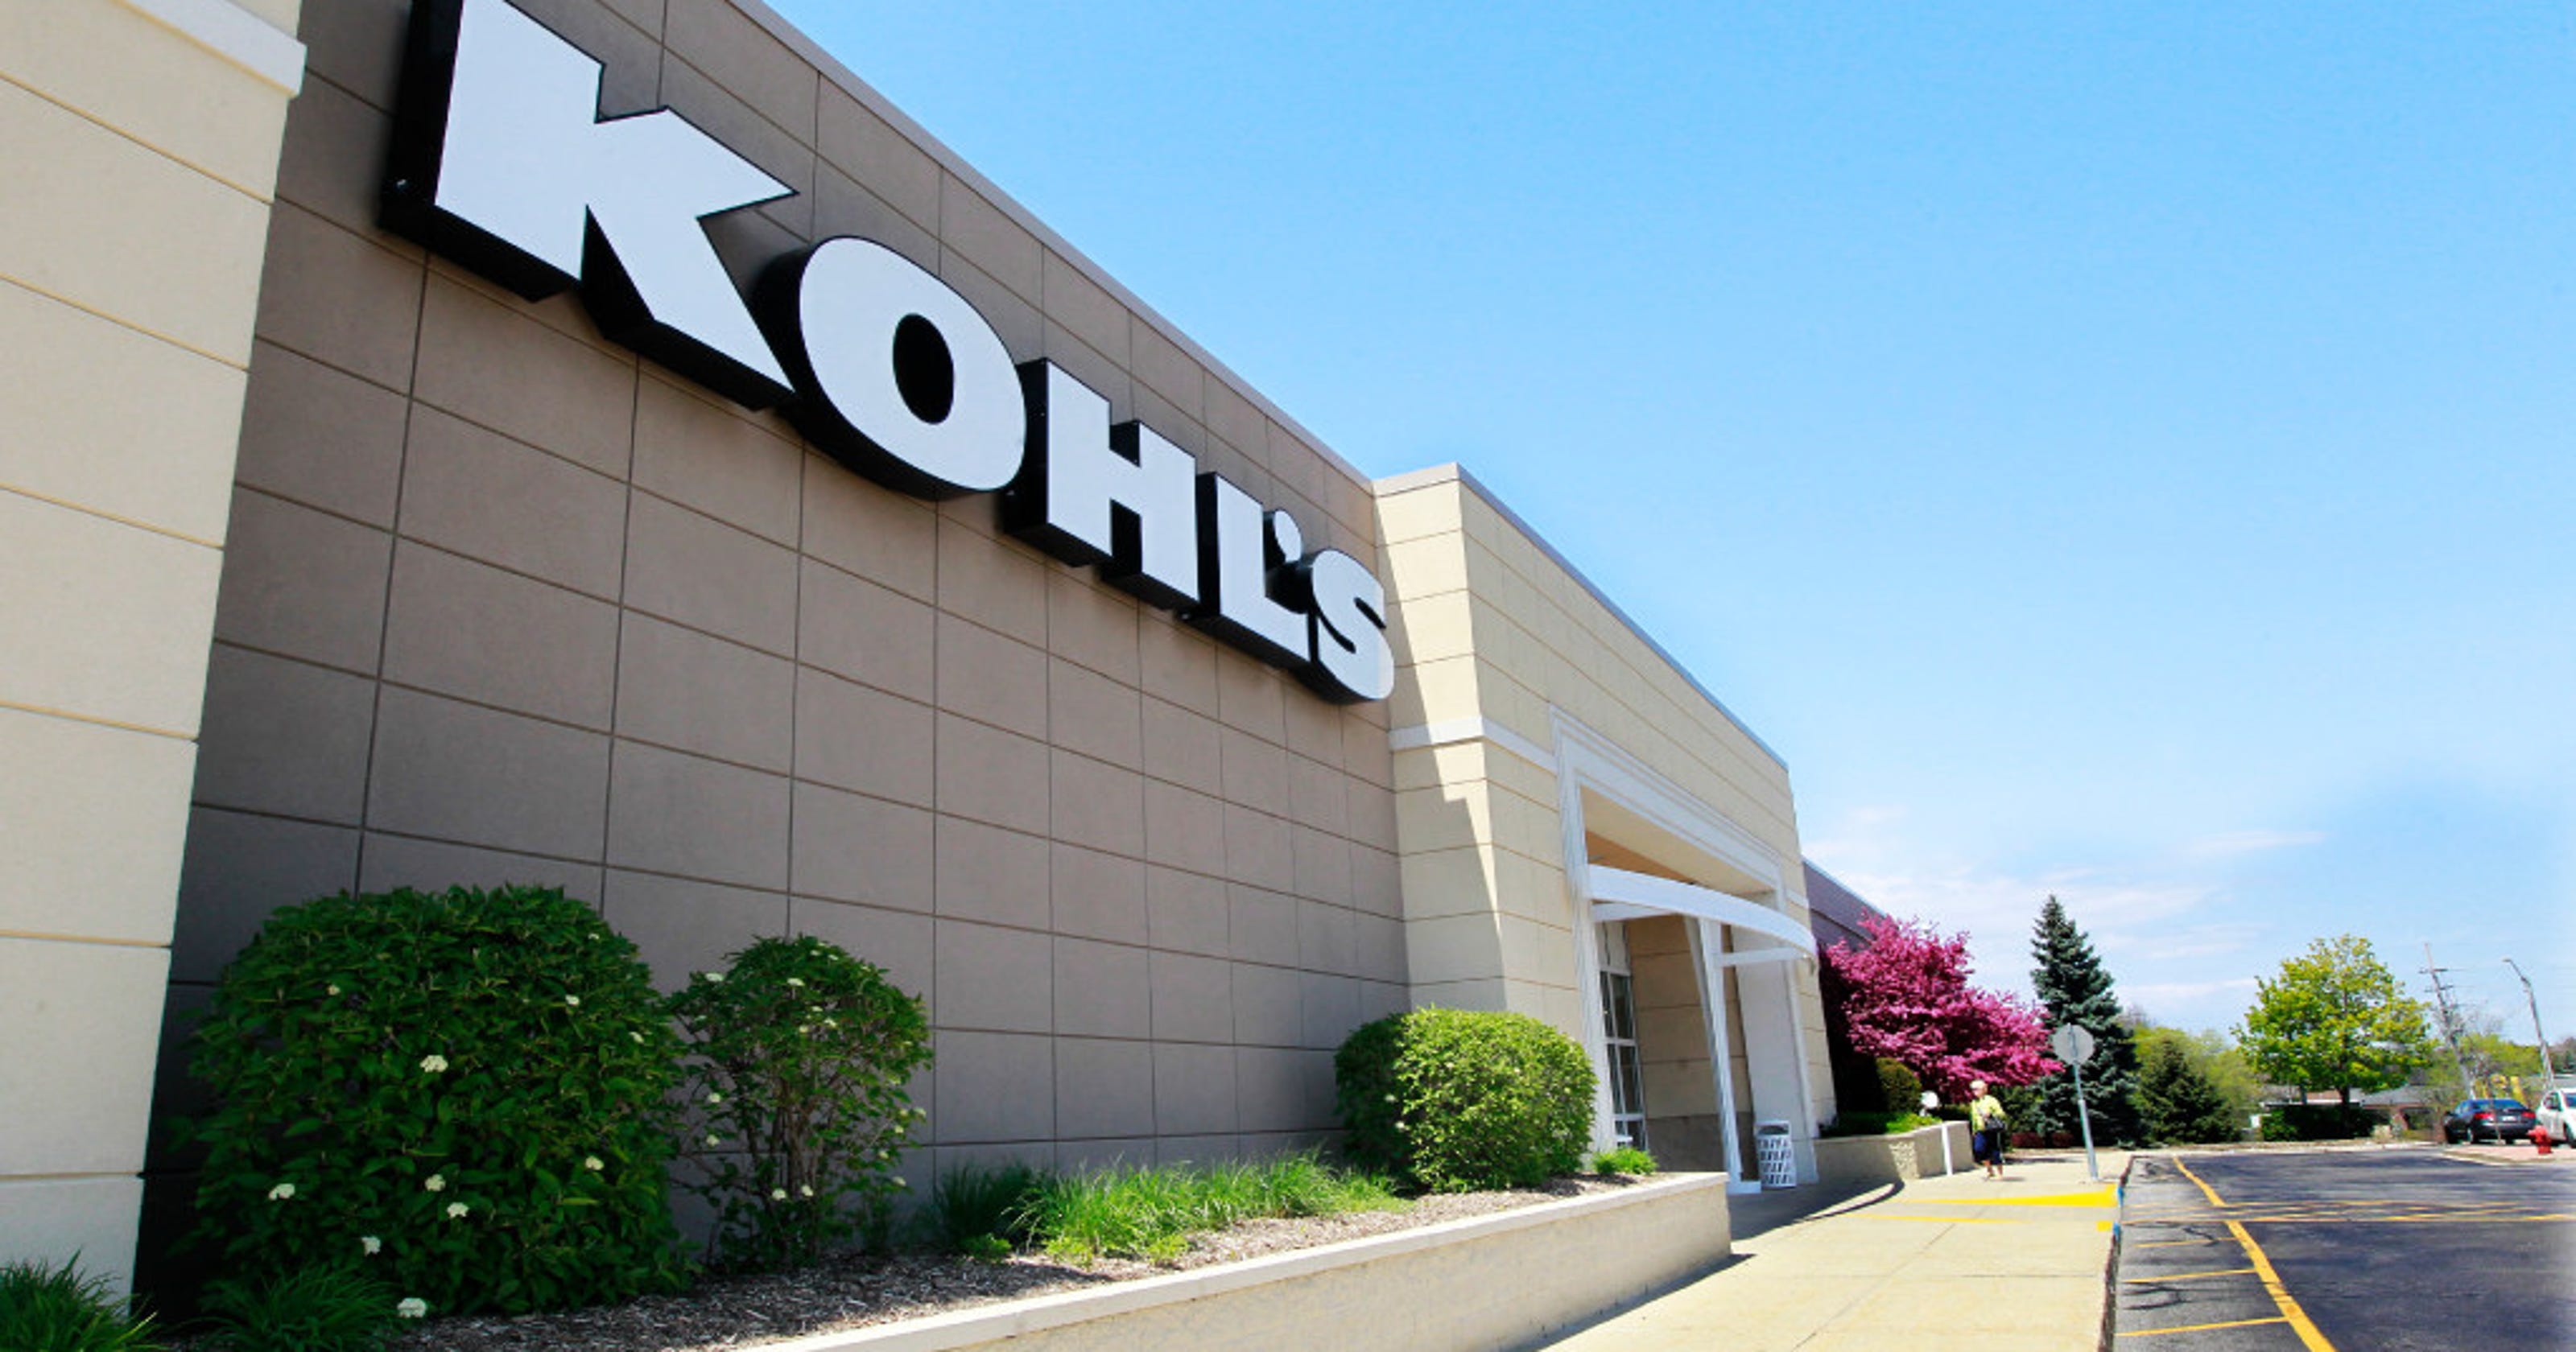 Kohl's reworking layout at half its stores